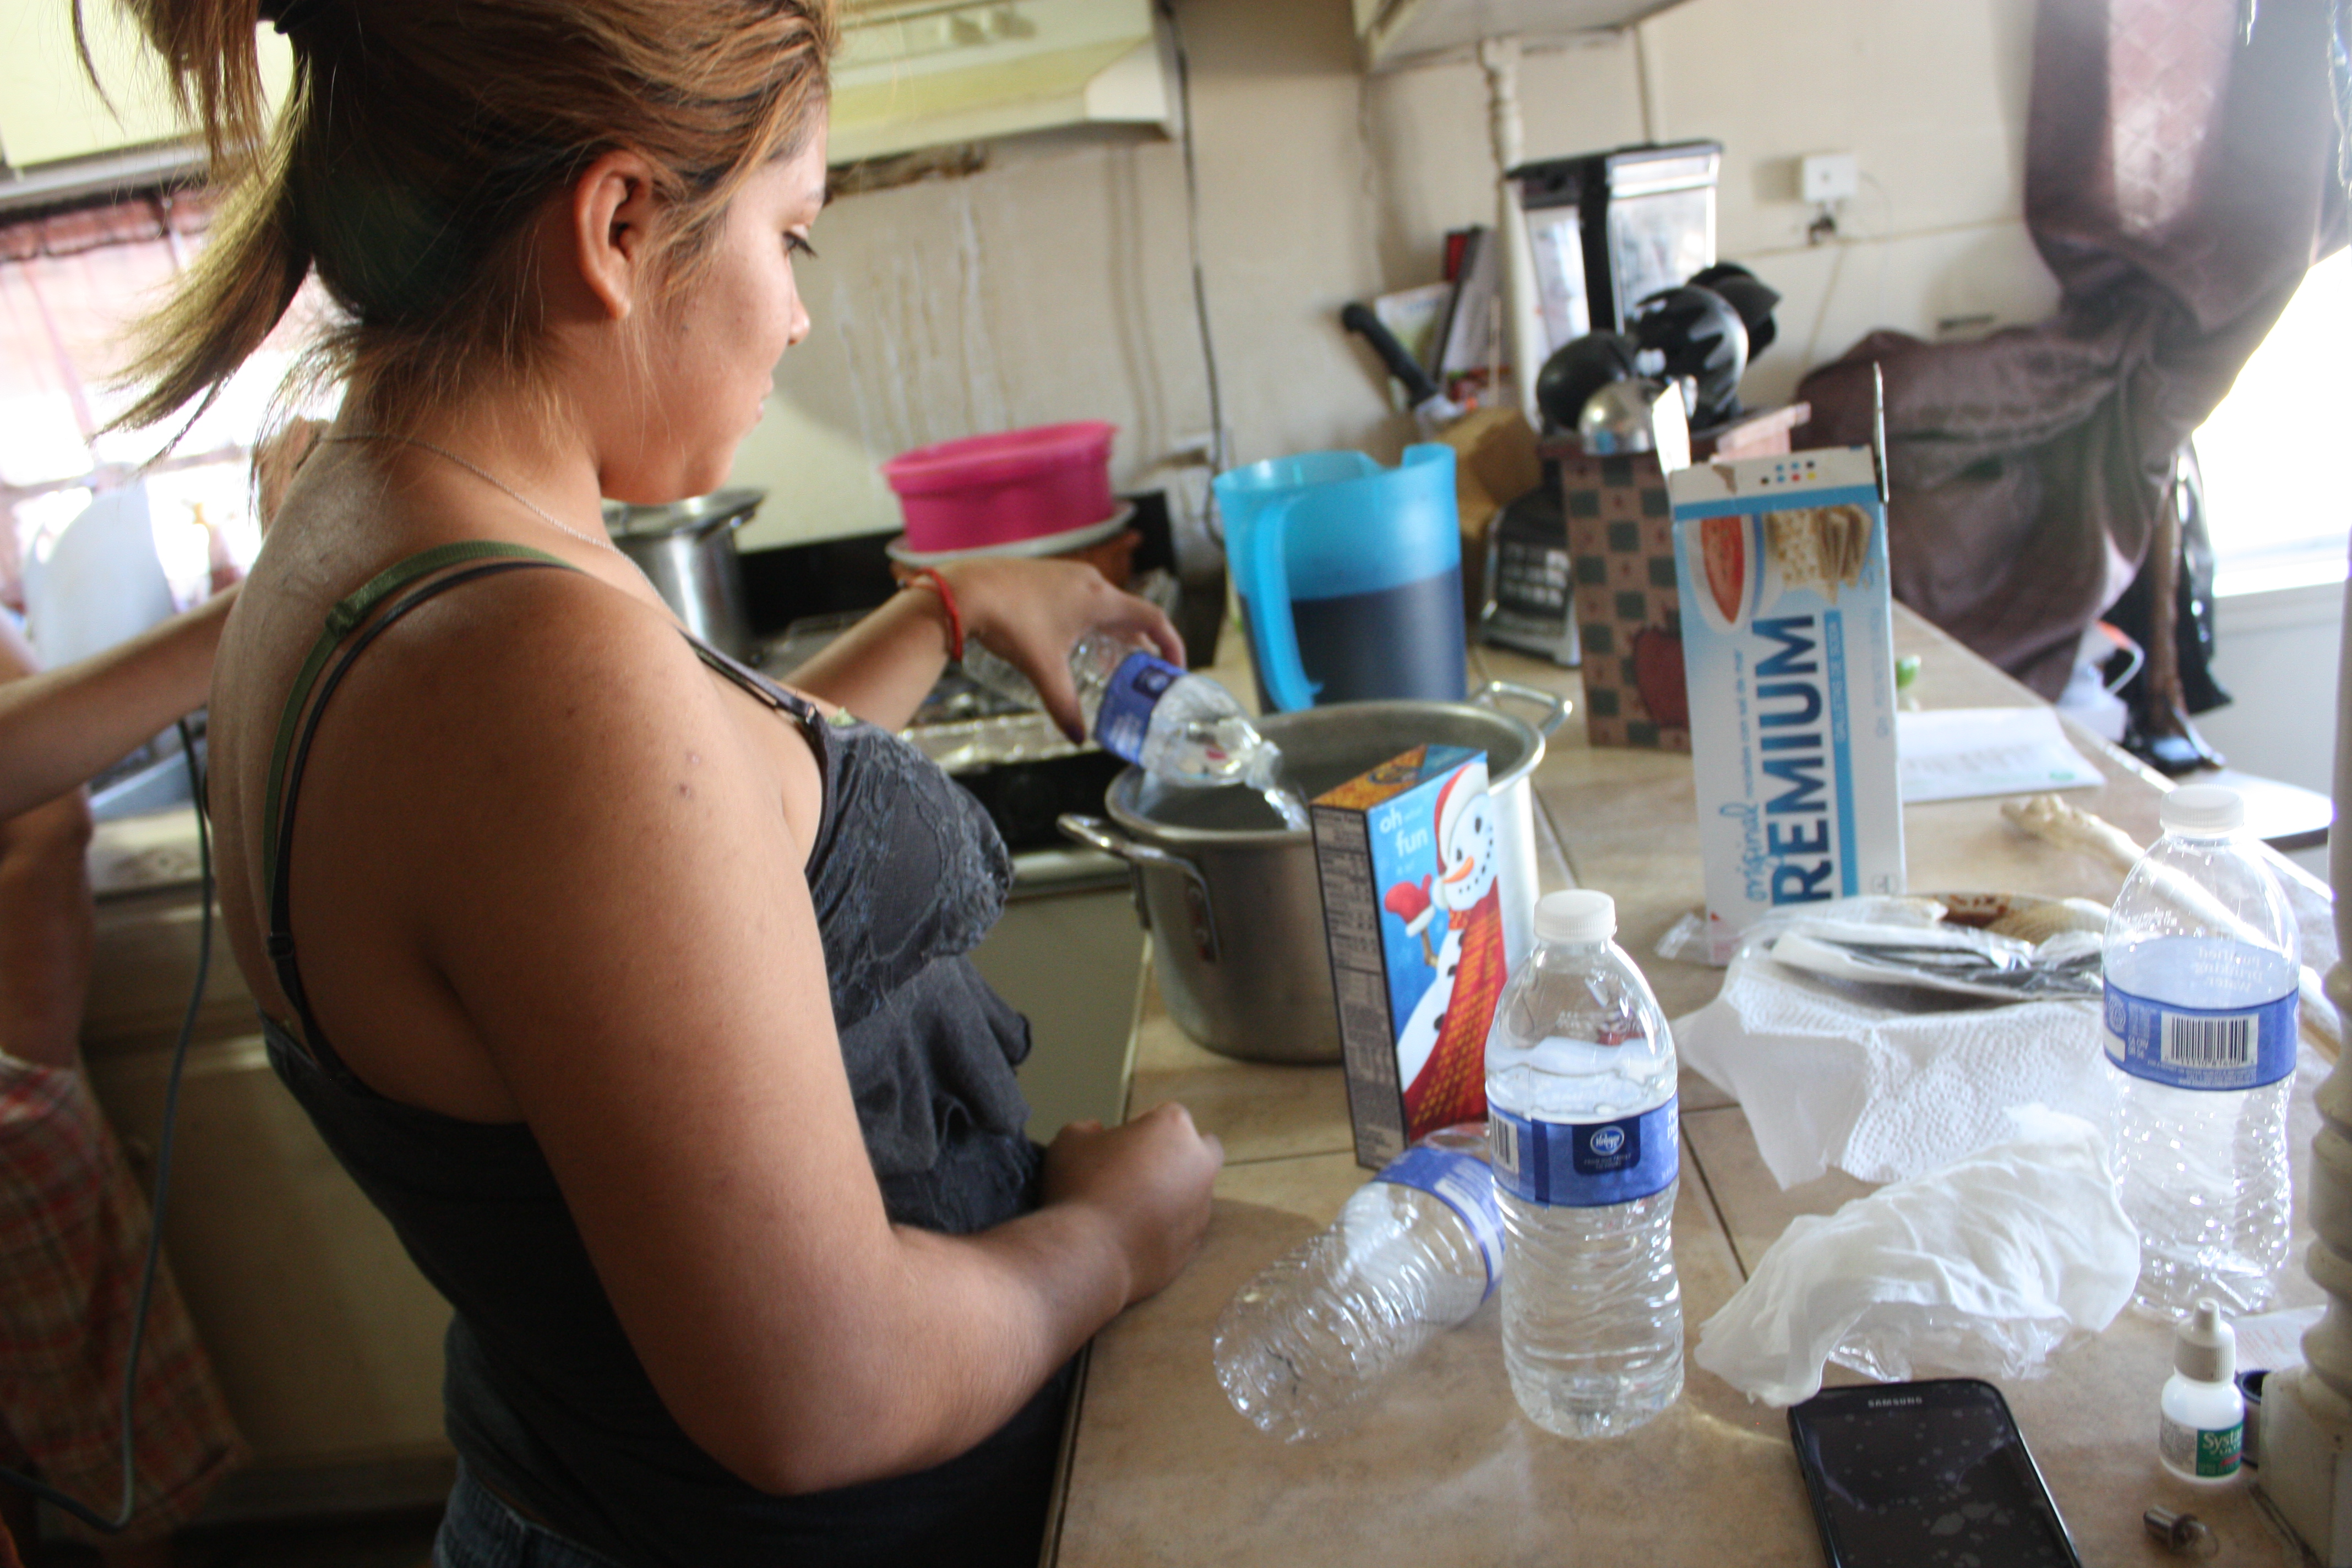 Medina’s daughter Guadalupe prepares for dinner, pouring bottles of water into a pot to make macaroni and cheese. 